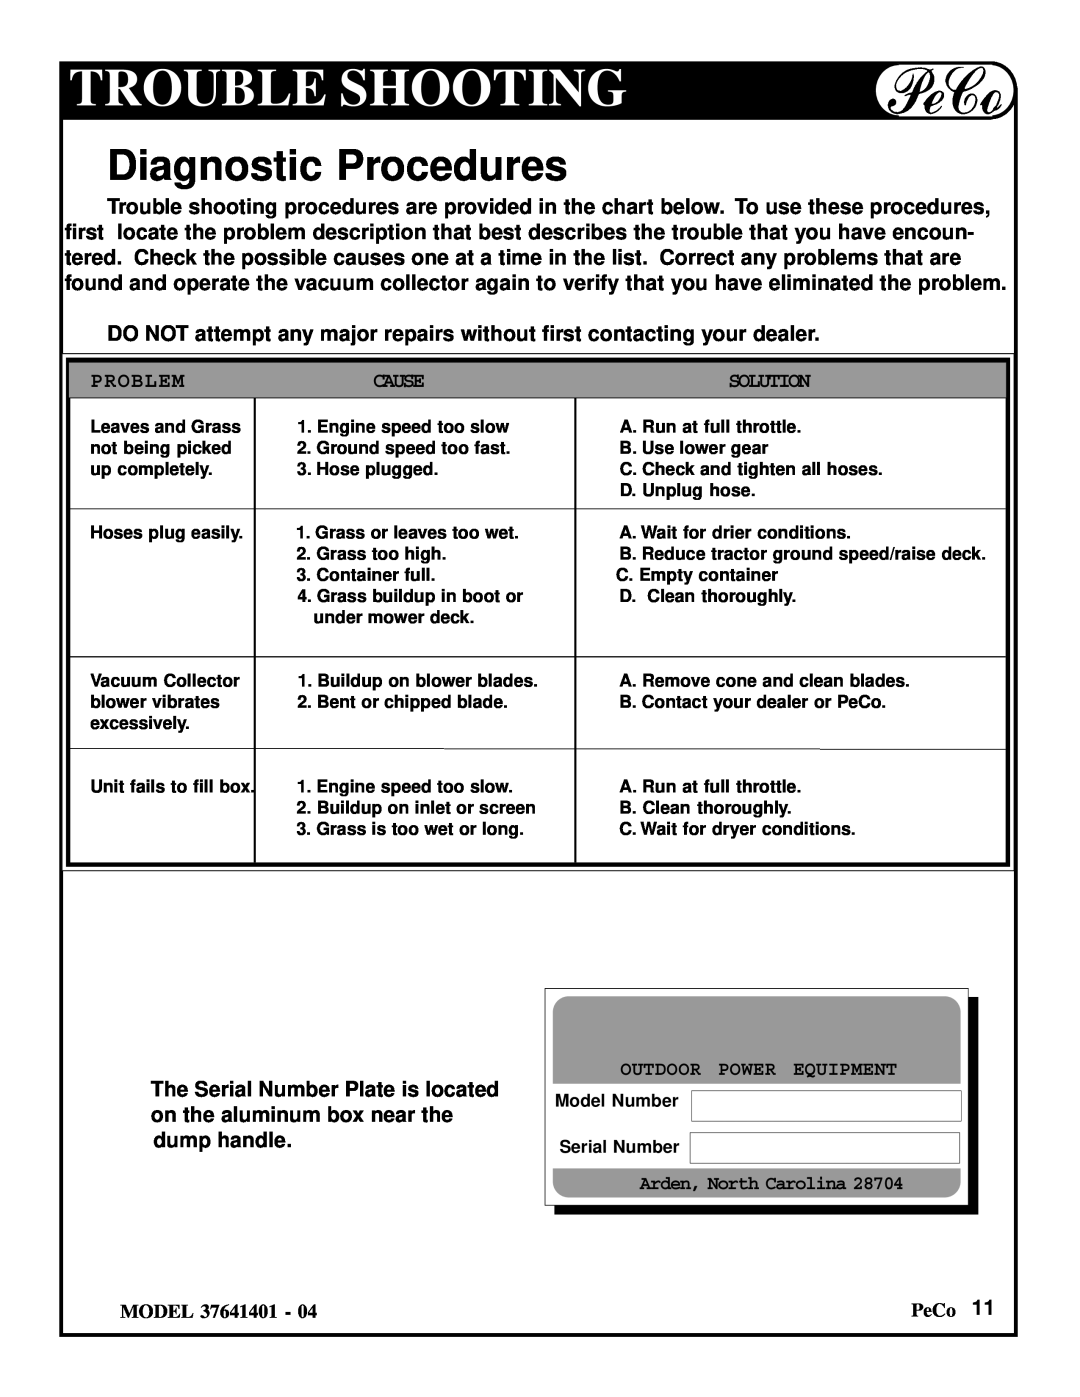 Briggs & Stratton 37641401 owner manual Trouble Shooting, Diagnostic Procedures, Problem, Cause, Solution 